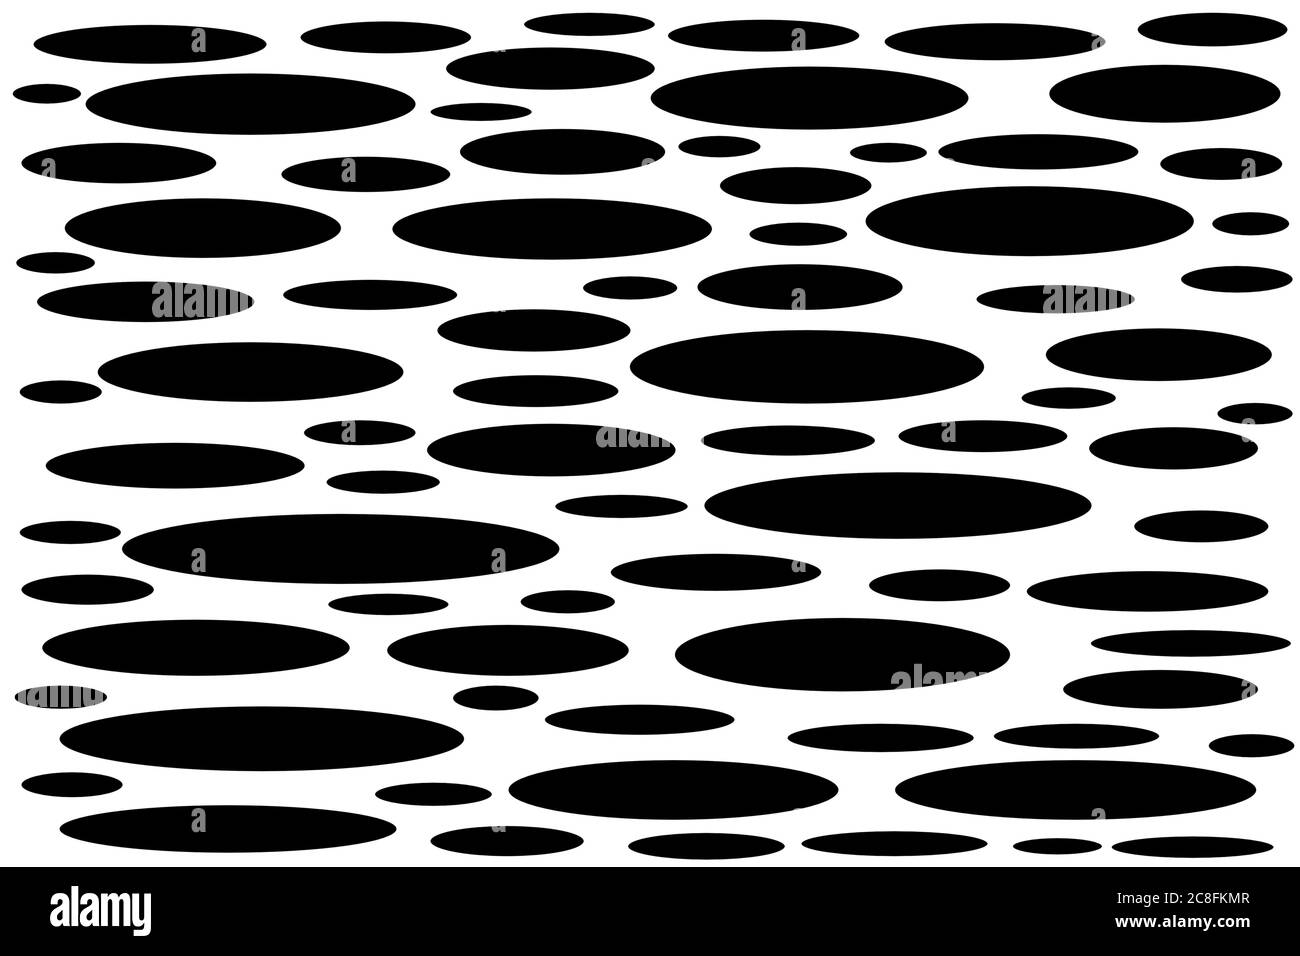 Black spotted background pattern, horizontal black oval shapes on white background for packaging, fabric, wallpaper, textile material and print Stock Photo